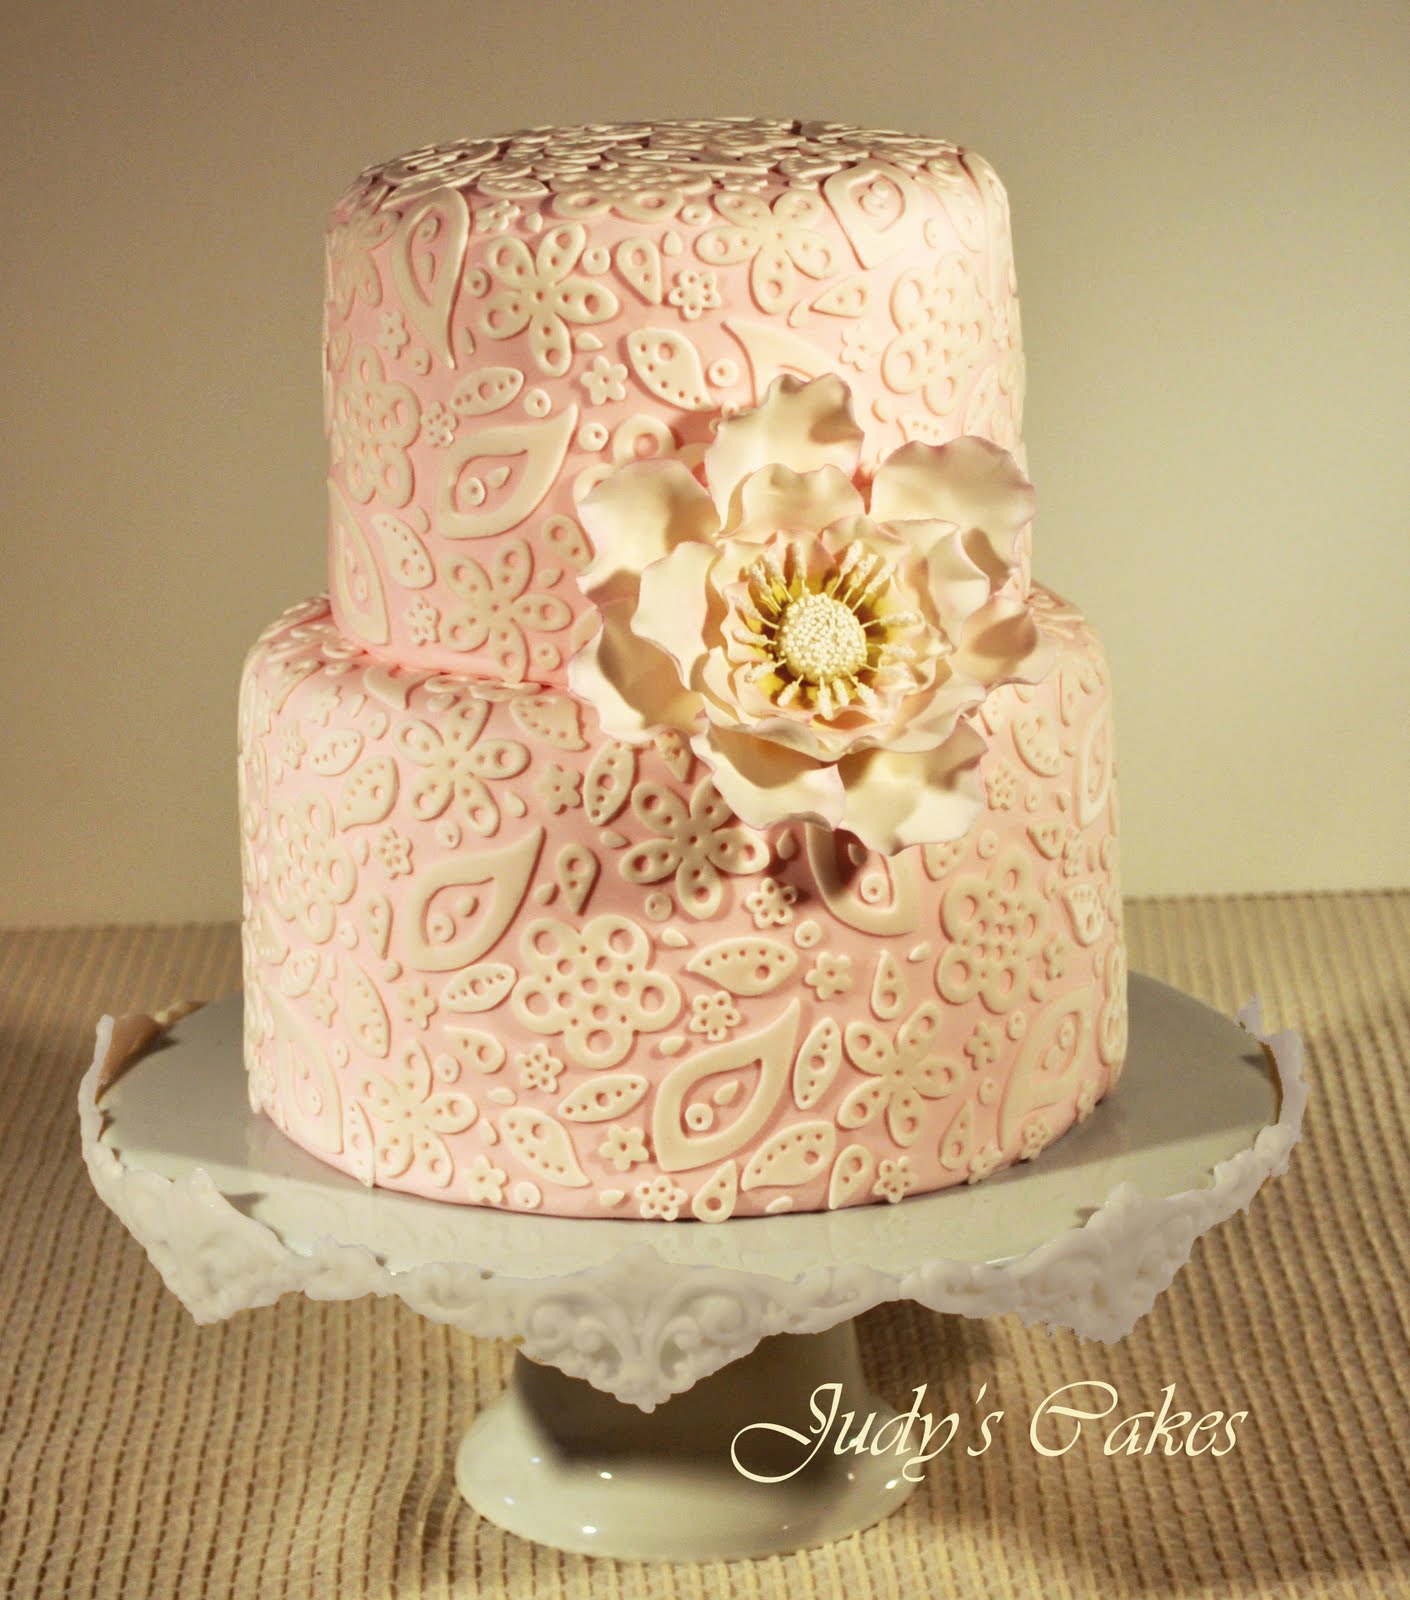 12 Photos of Lace Themed Birthday Cakes